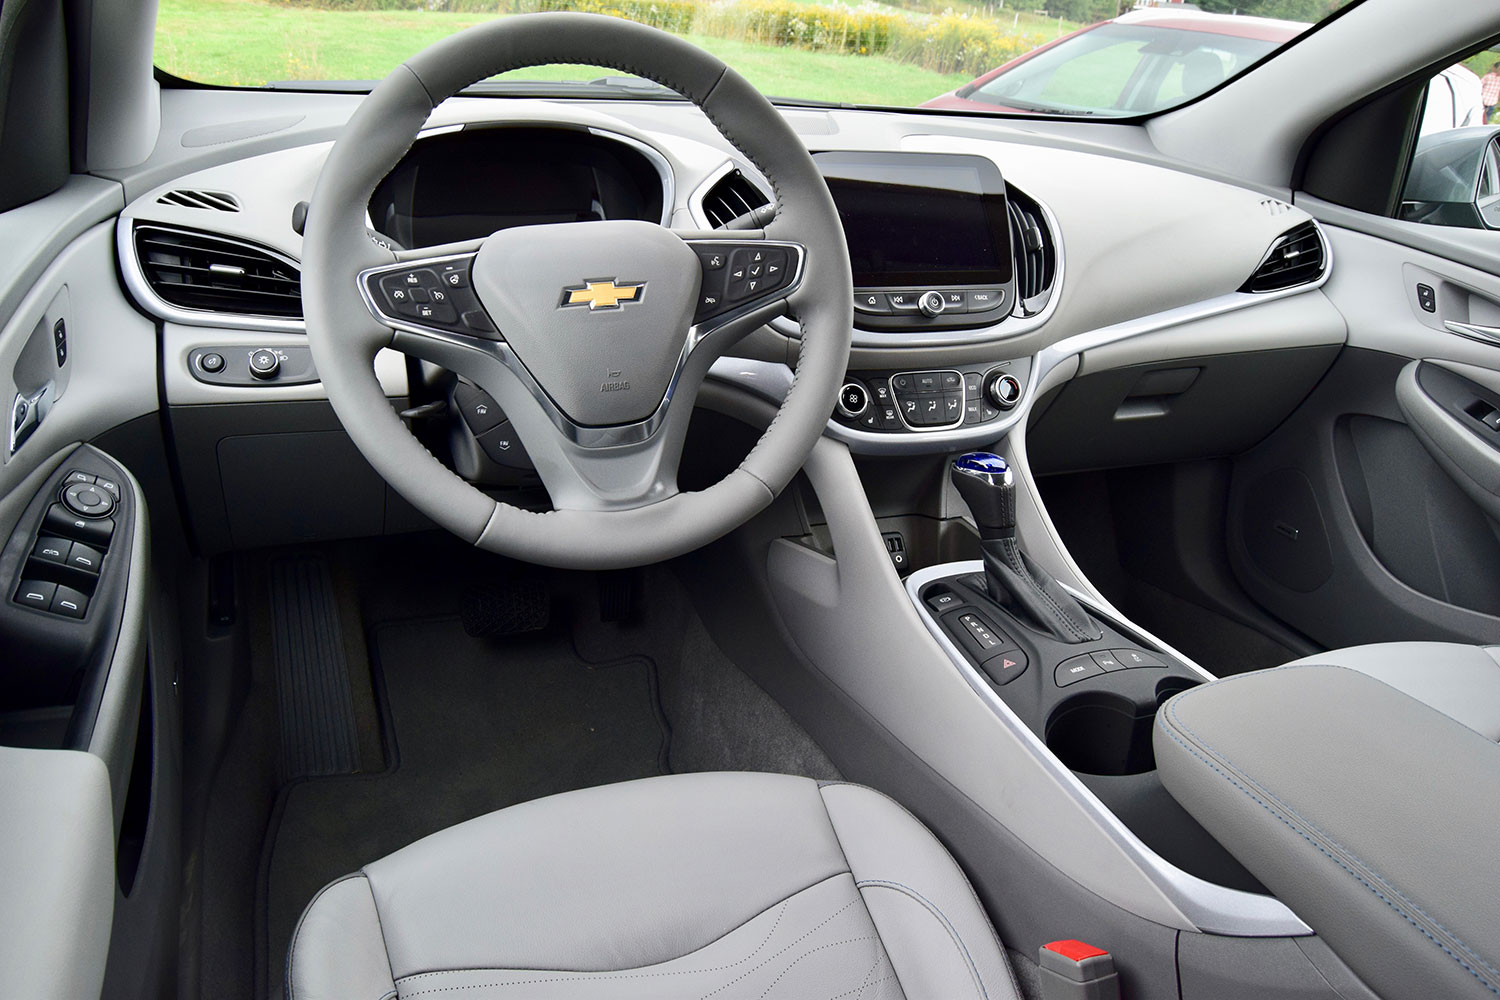 2019 Chevrolet Volt Review, Pricing, and Specs